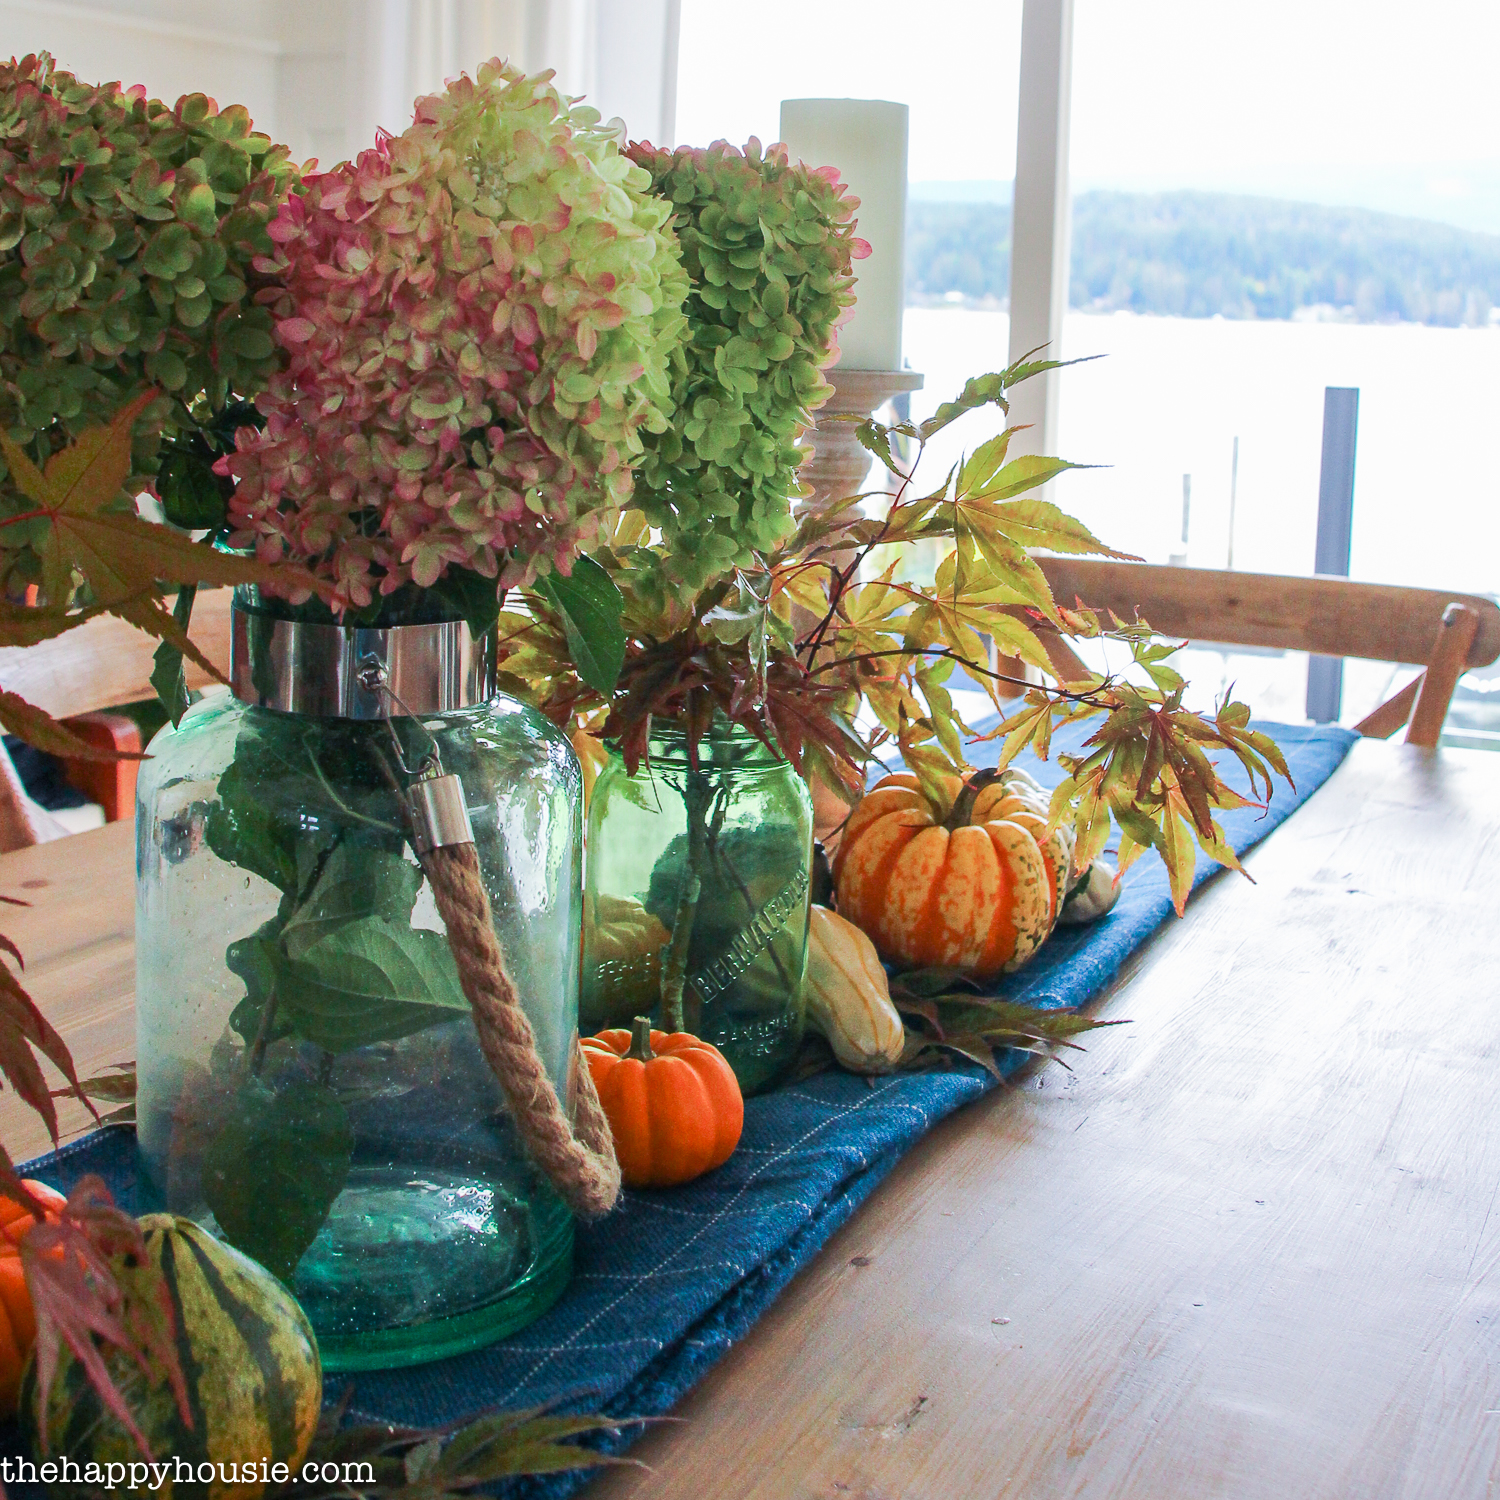 A blue table runner with pumpkins and hydrangeas on it.